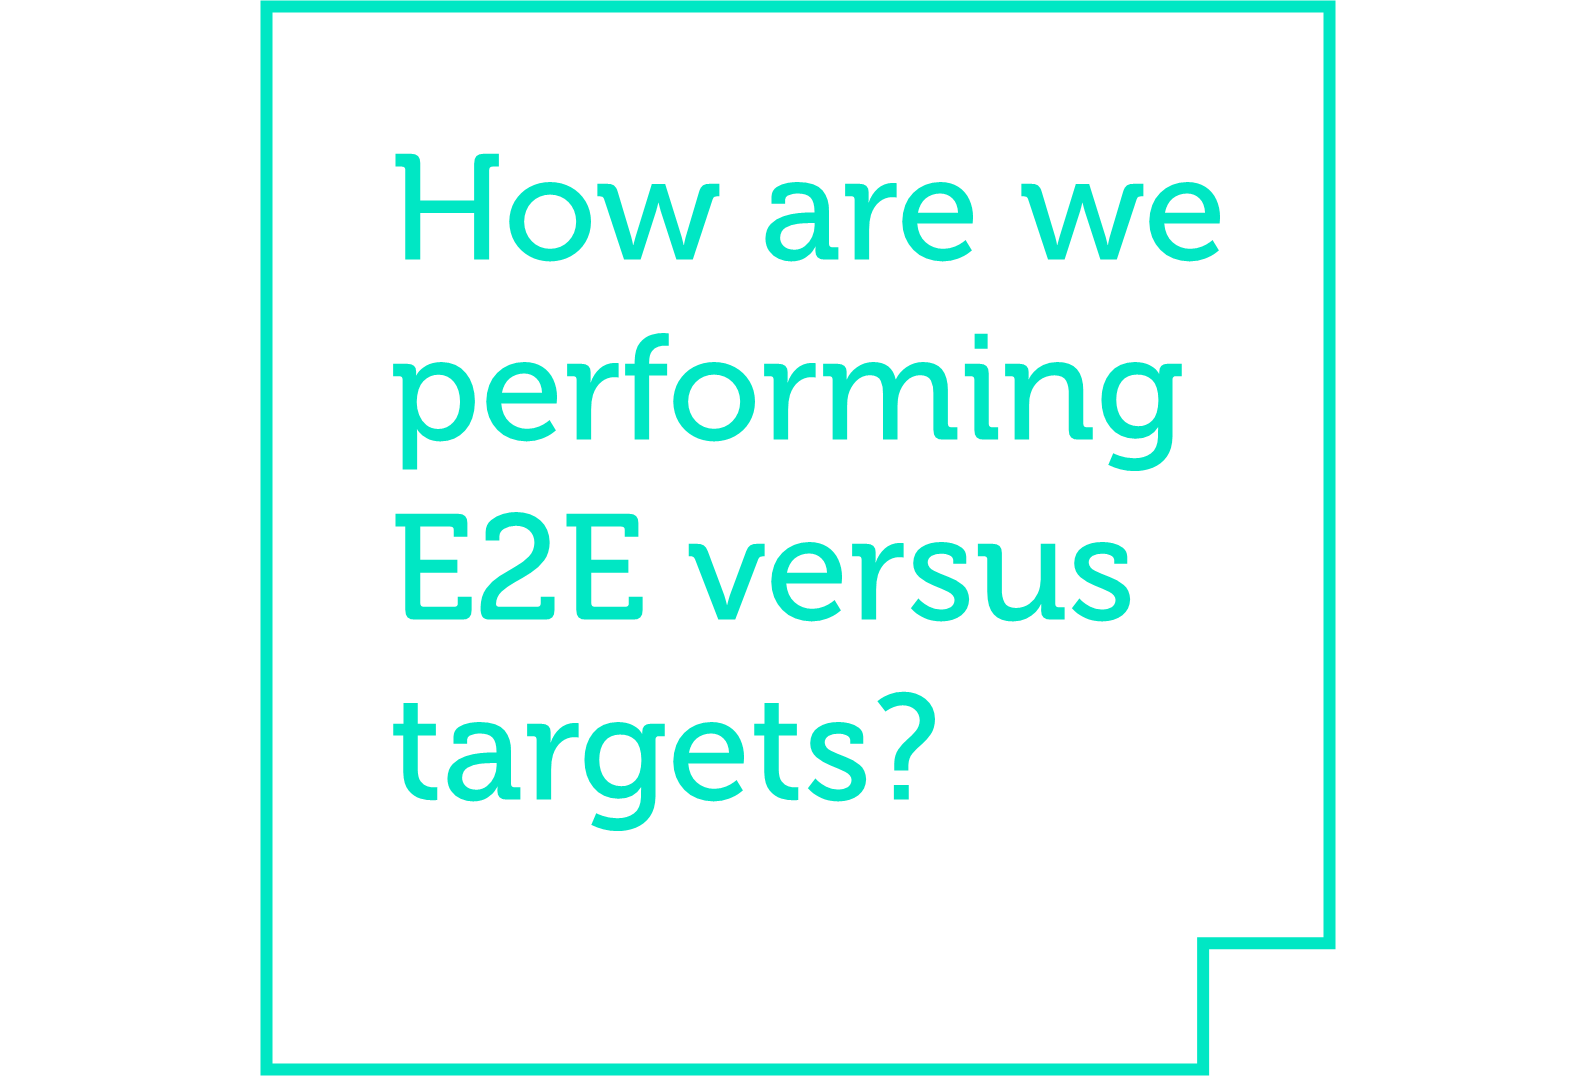 Axon: How are we performing E2E versus targets?